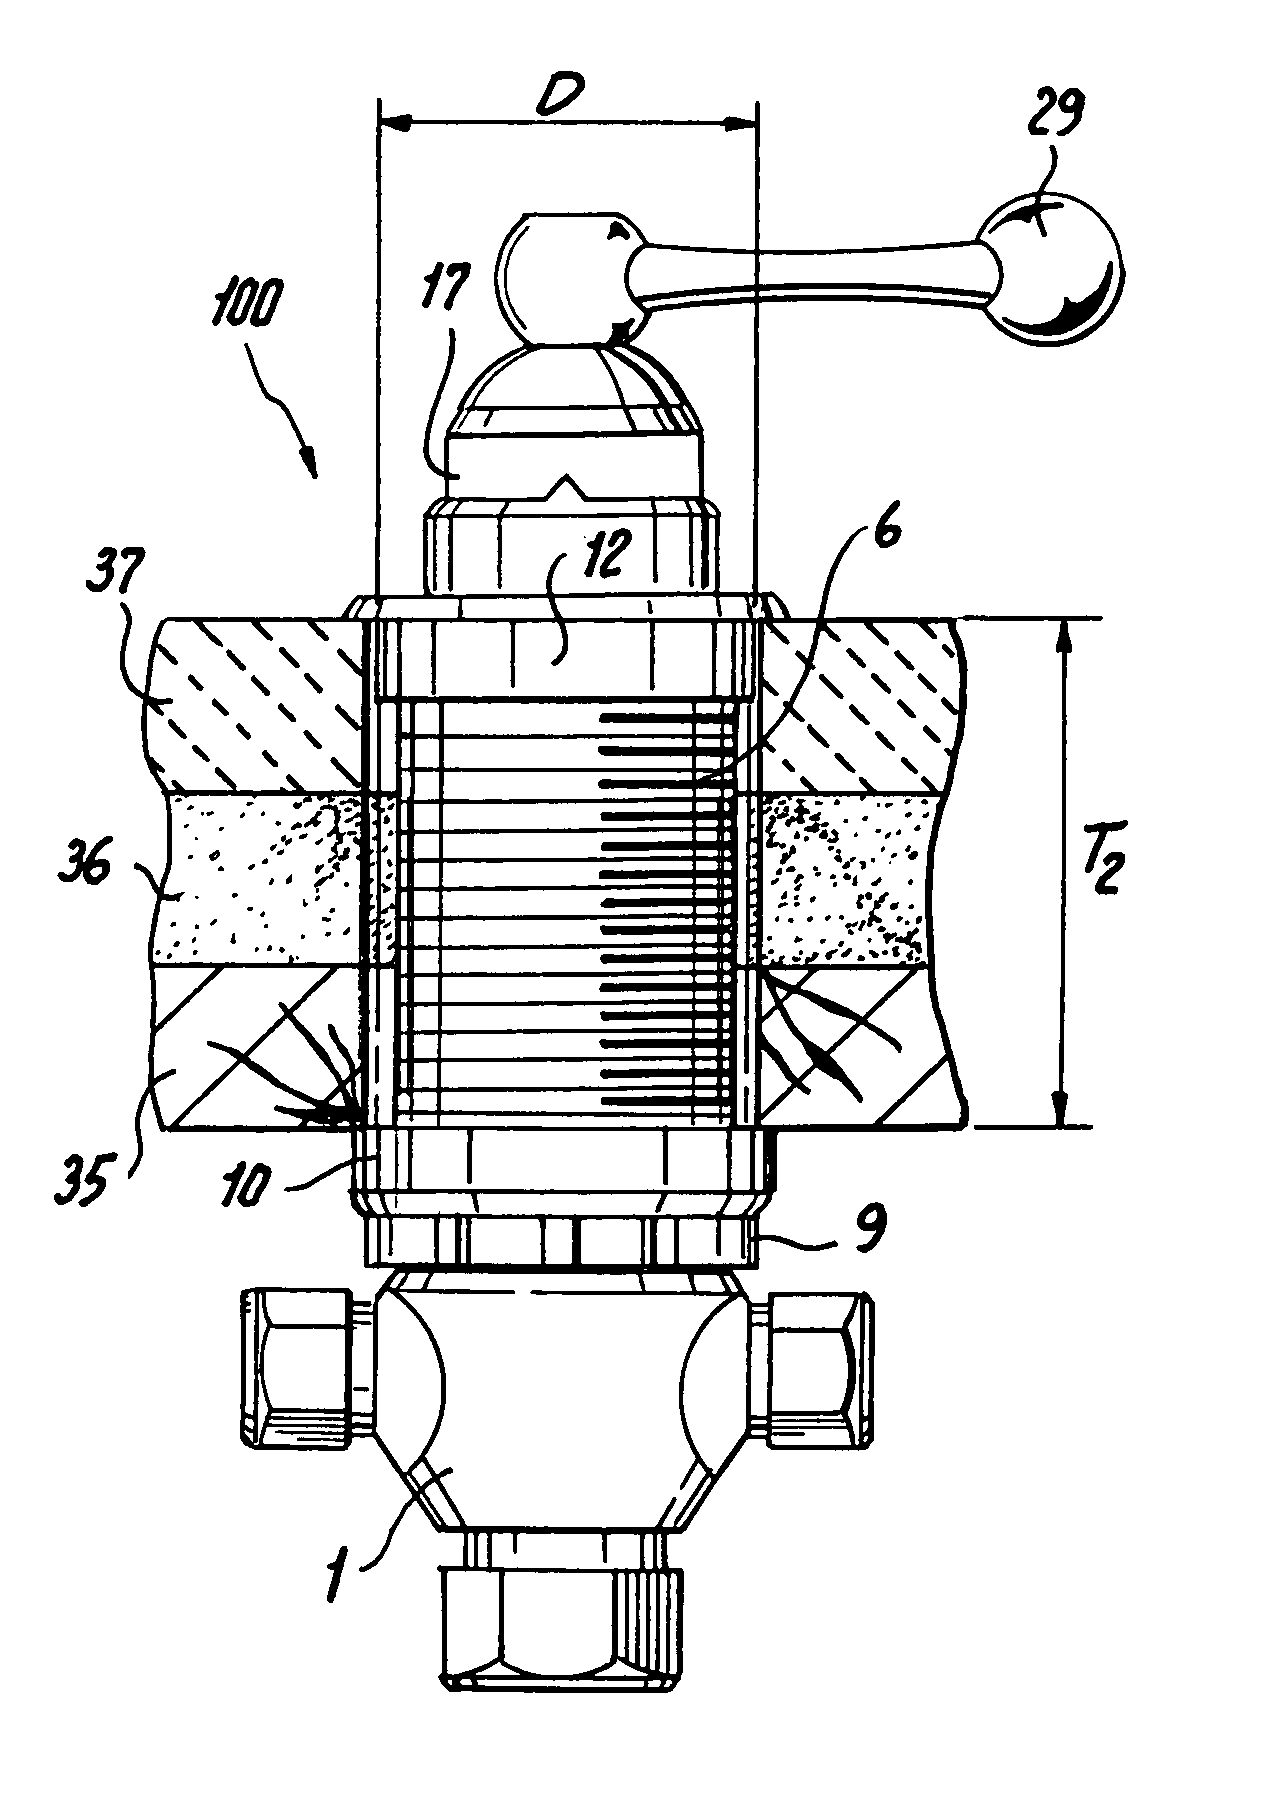 Thermostatic mixing valve for vertical mounting upon a horizontal bathtub deck